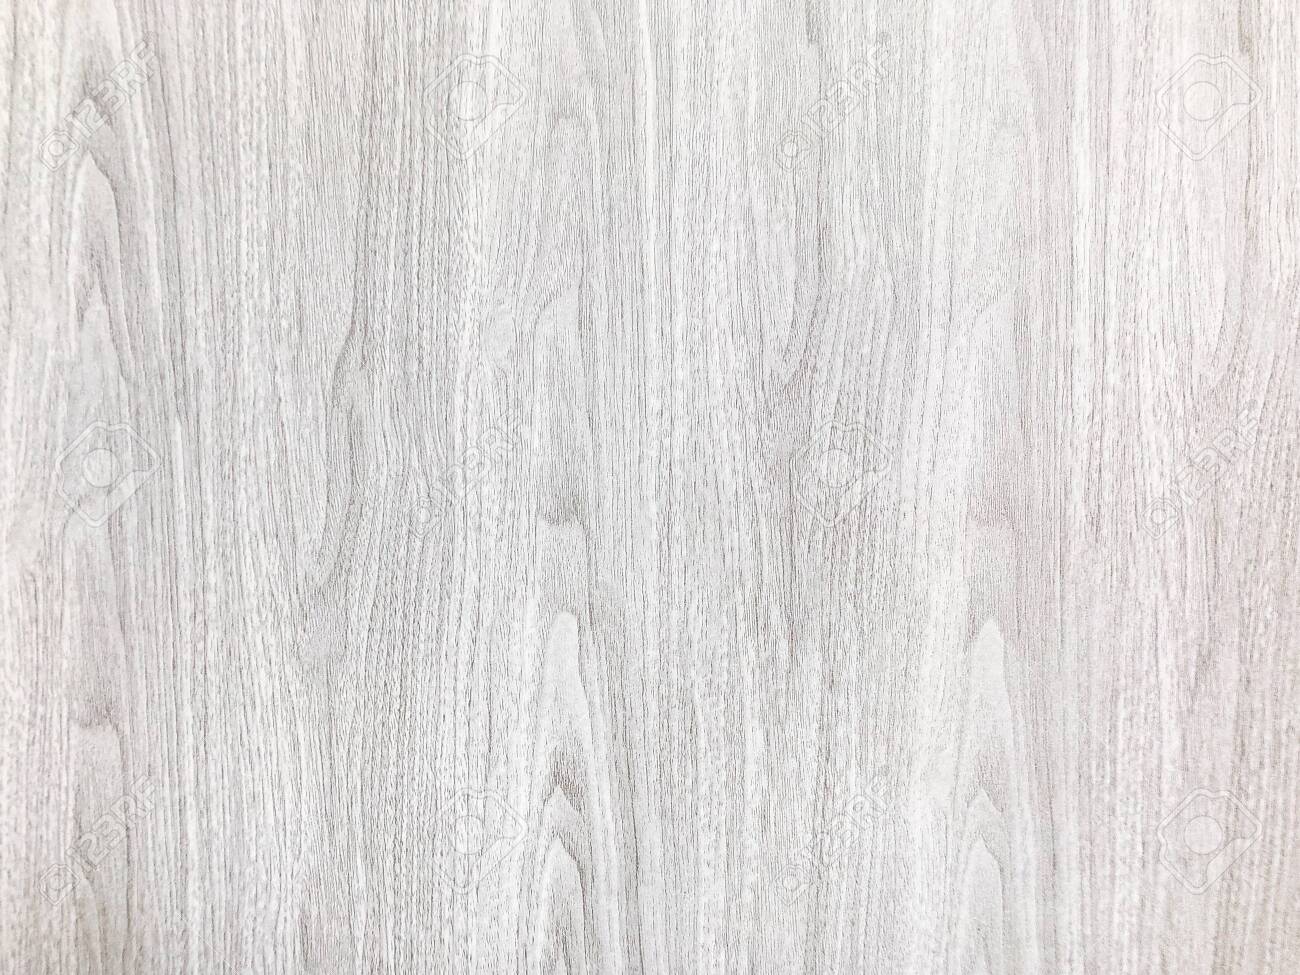 Pale Gray Old Wood Grain Vertical Texture Light Tone Wooden